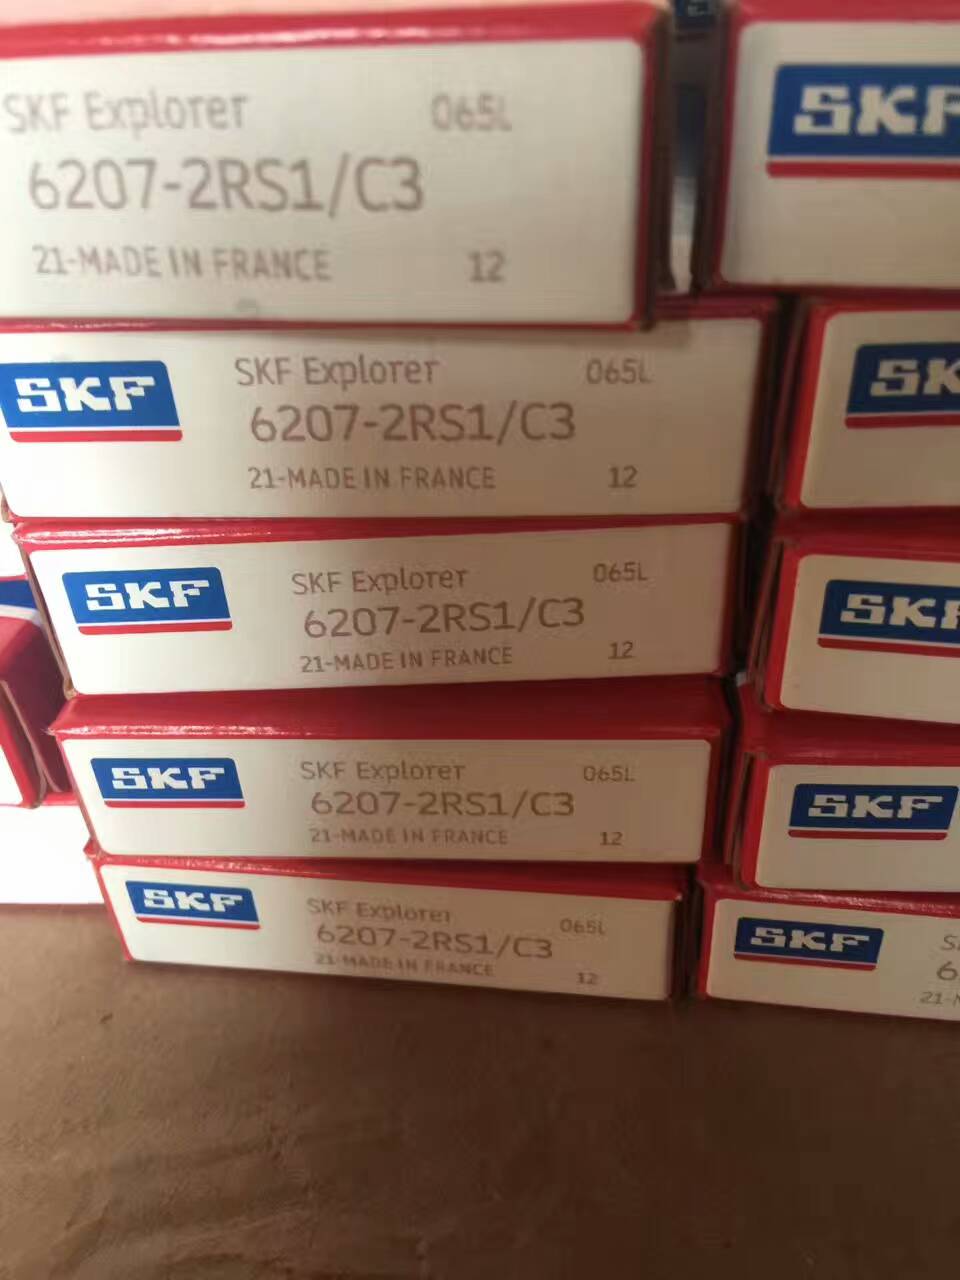 Open 2Z 2RSH C3 *Choose your size* SKF Bearing 6000-6307 Series